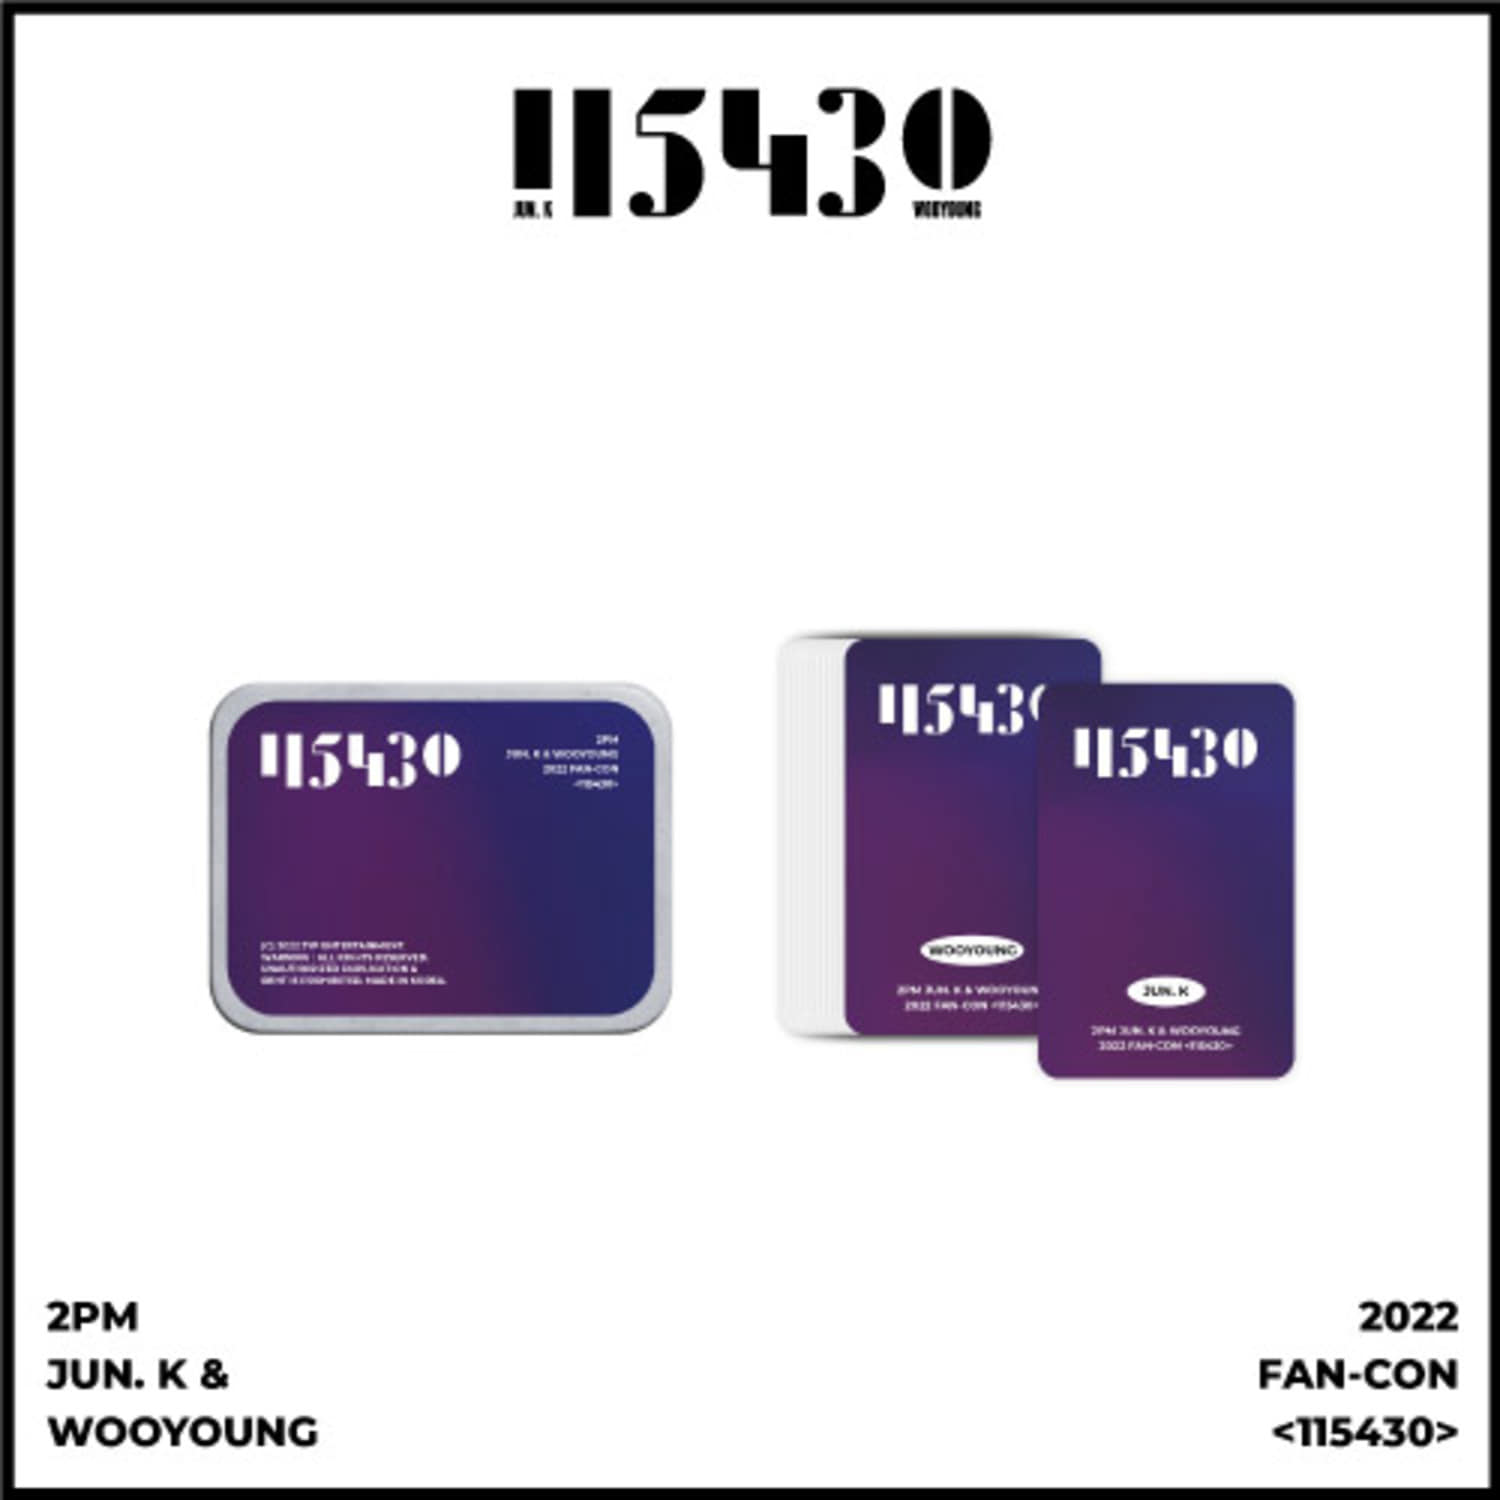 2PM JUN. K &amp; WOOYOUNG 2022 FAN-CON [115430] OFFICIAL GOODS 틴케이스 &amp; 포토카드 세트 TIN CASE &amp; PHOTO CARD SET